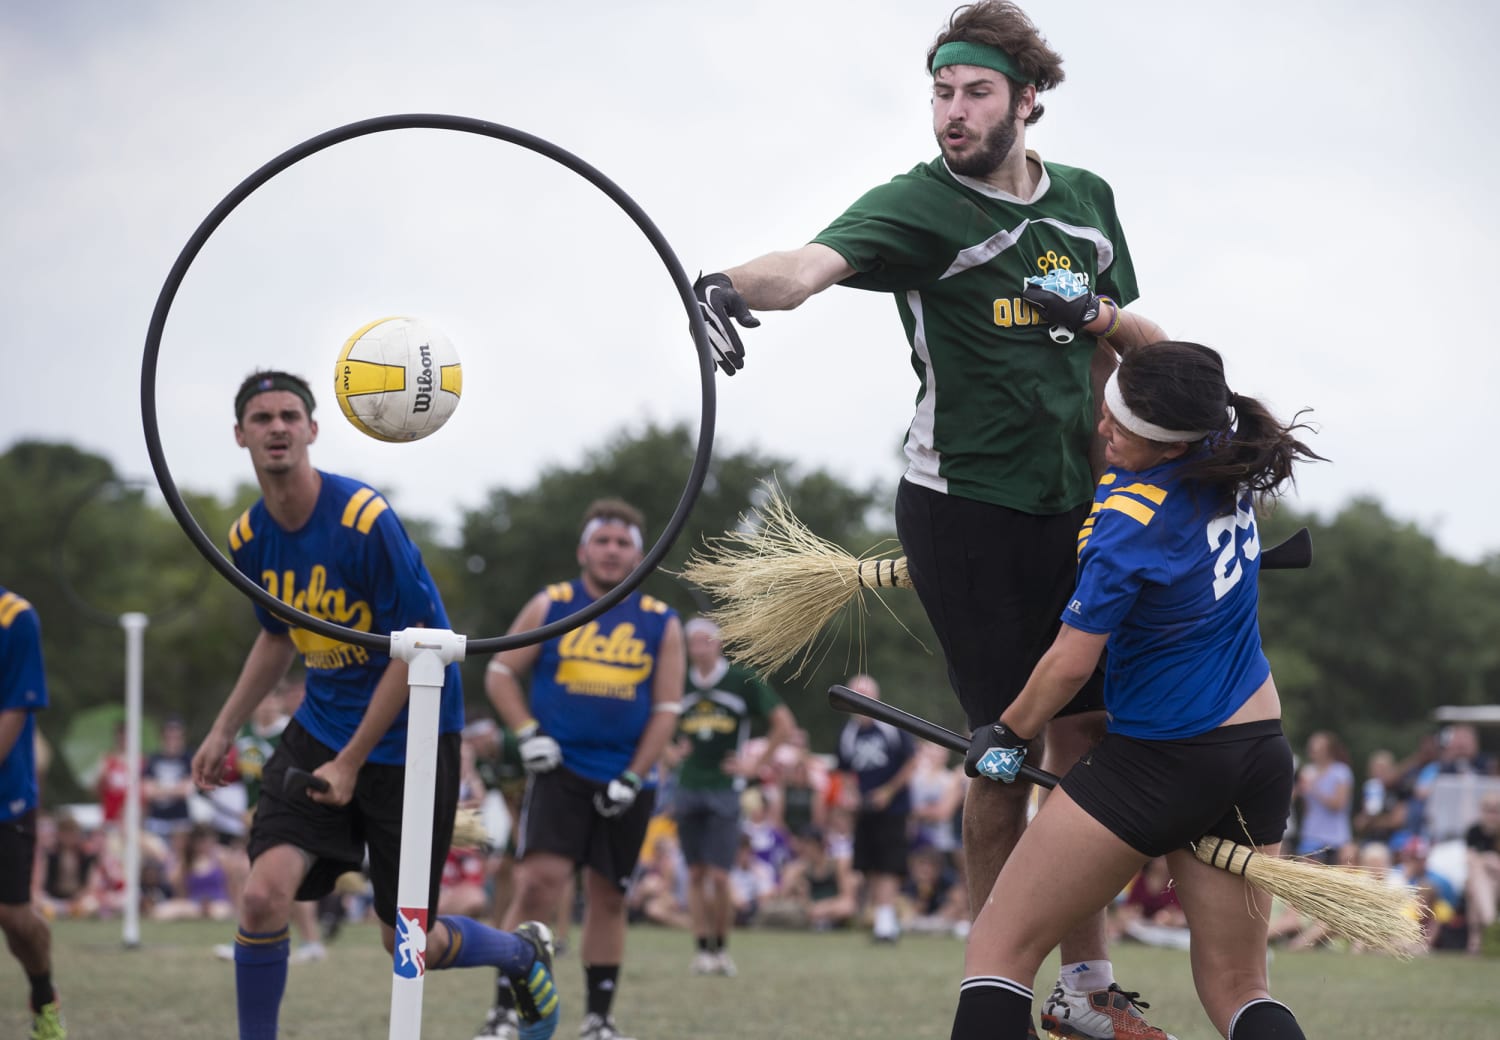 Quidditch to change name, citing J.K. Rowling’s ‘anti-trans positions’